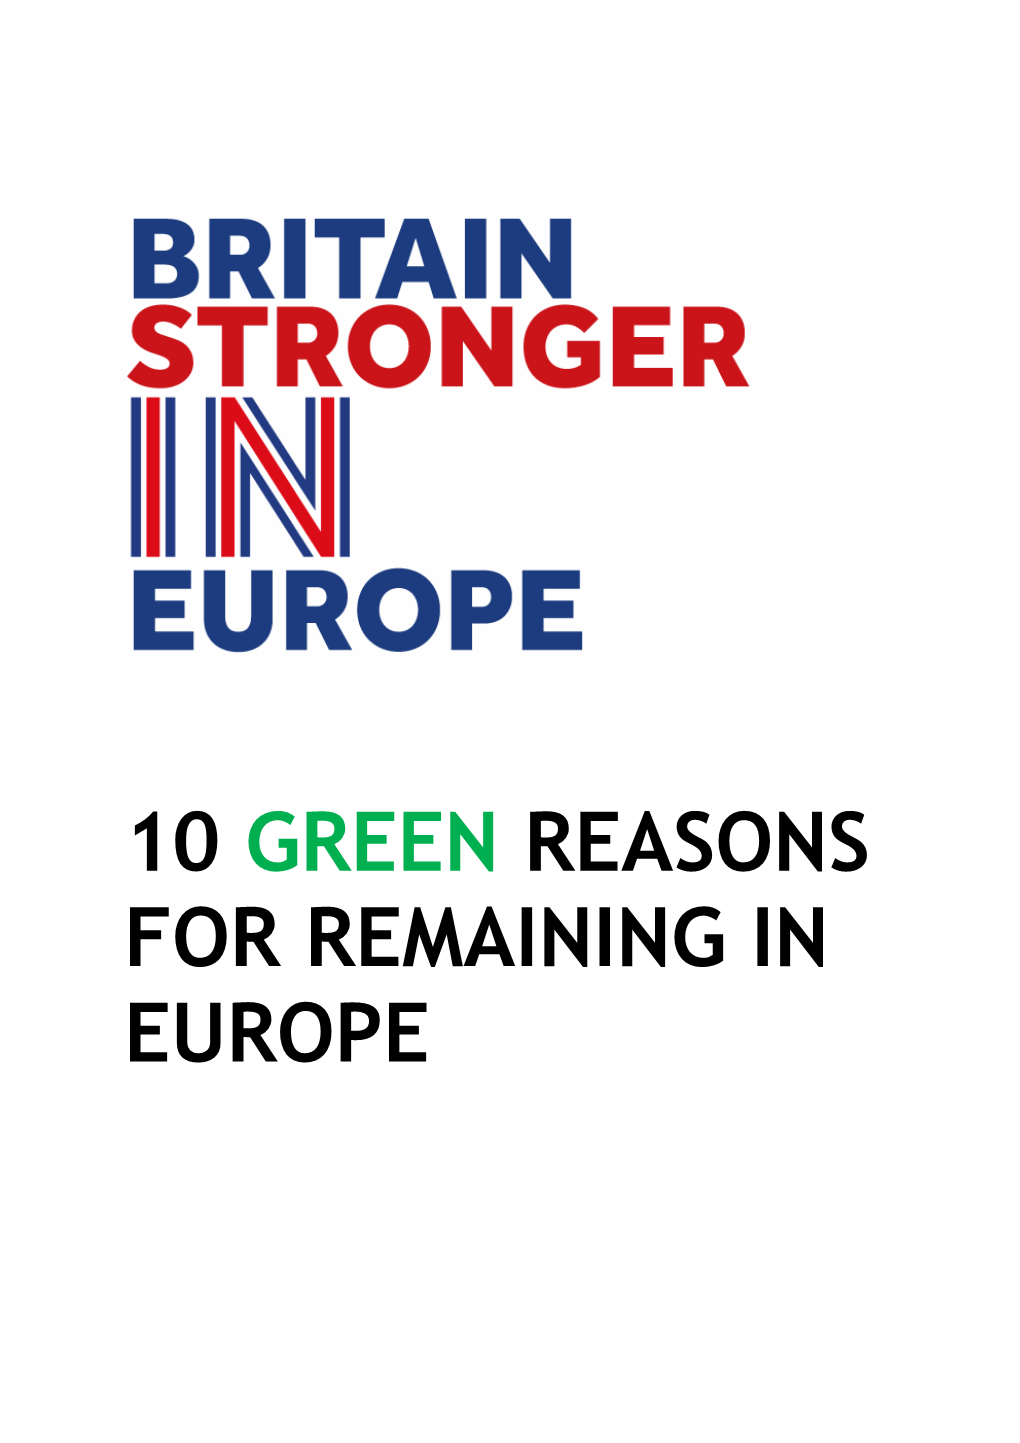 10 Green Reasons for Remaining in Europe